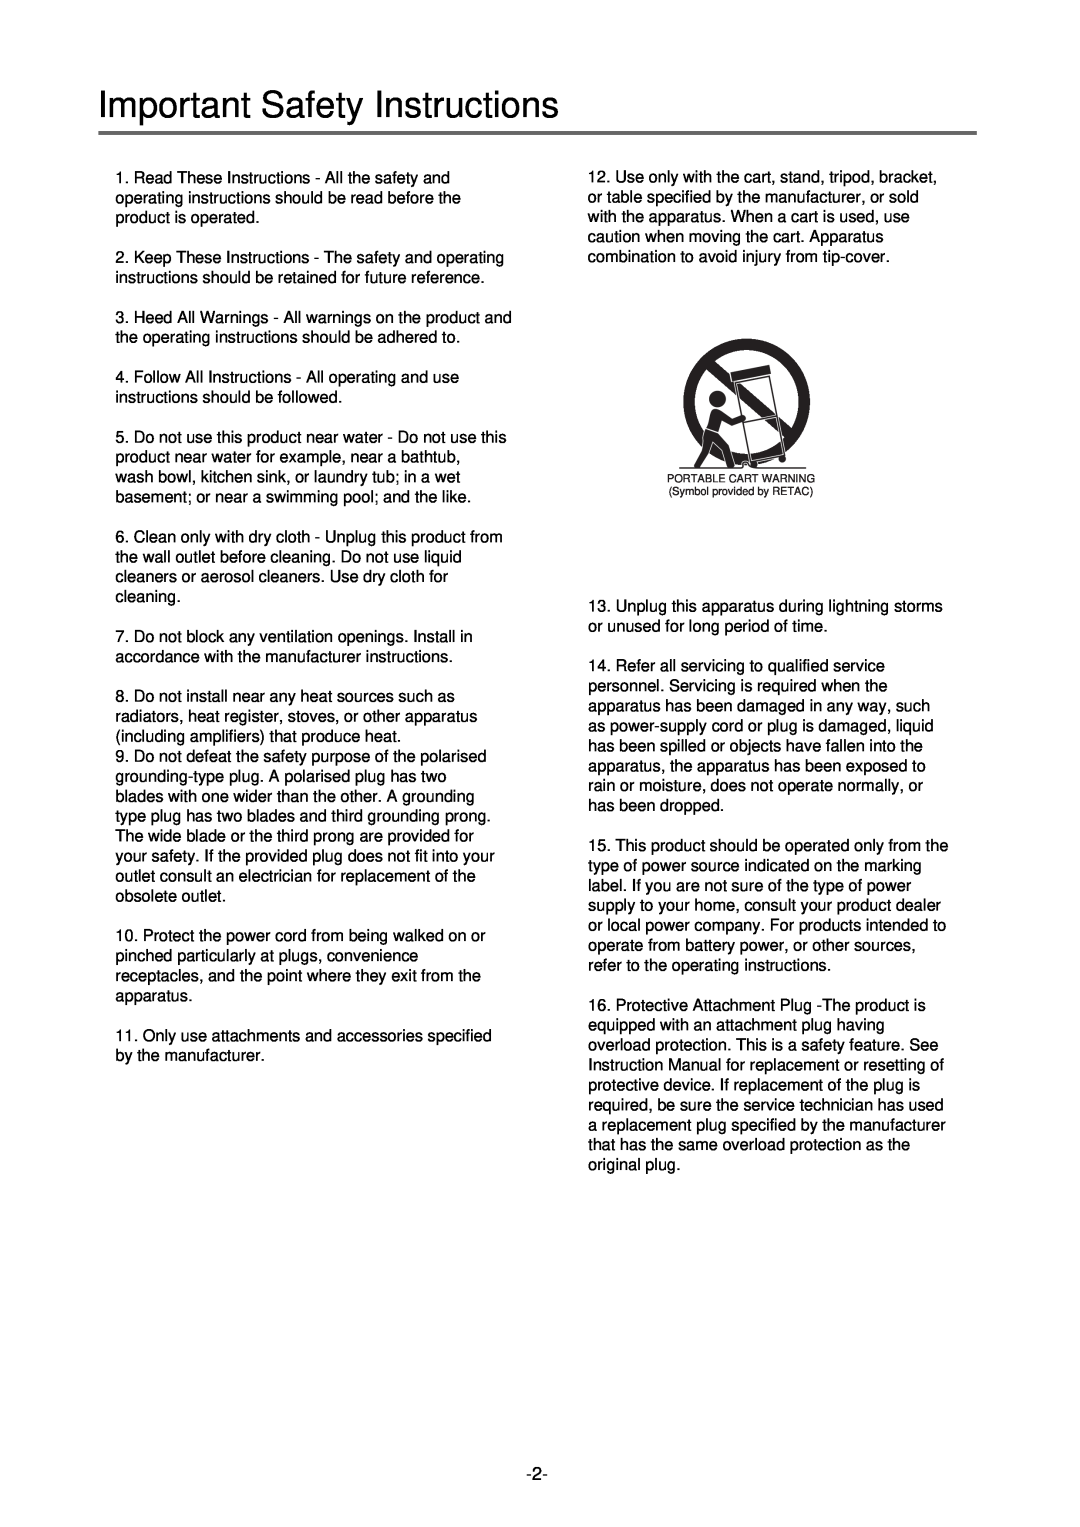 Palsonic TFTV-430 user manual Important Safety Instructions, PORTABLE CART WARNING Symbol provided by RETAC 